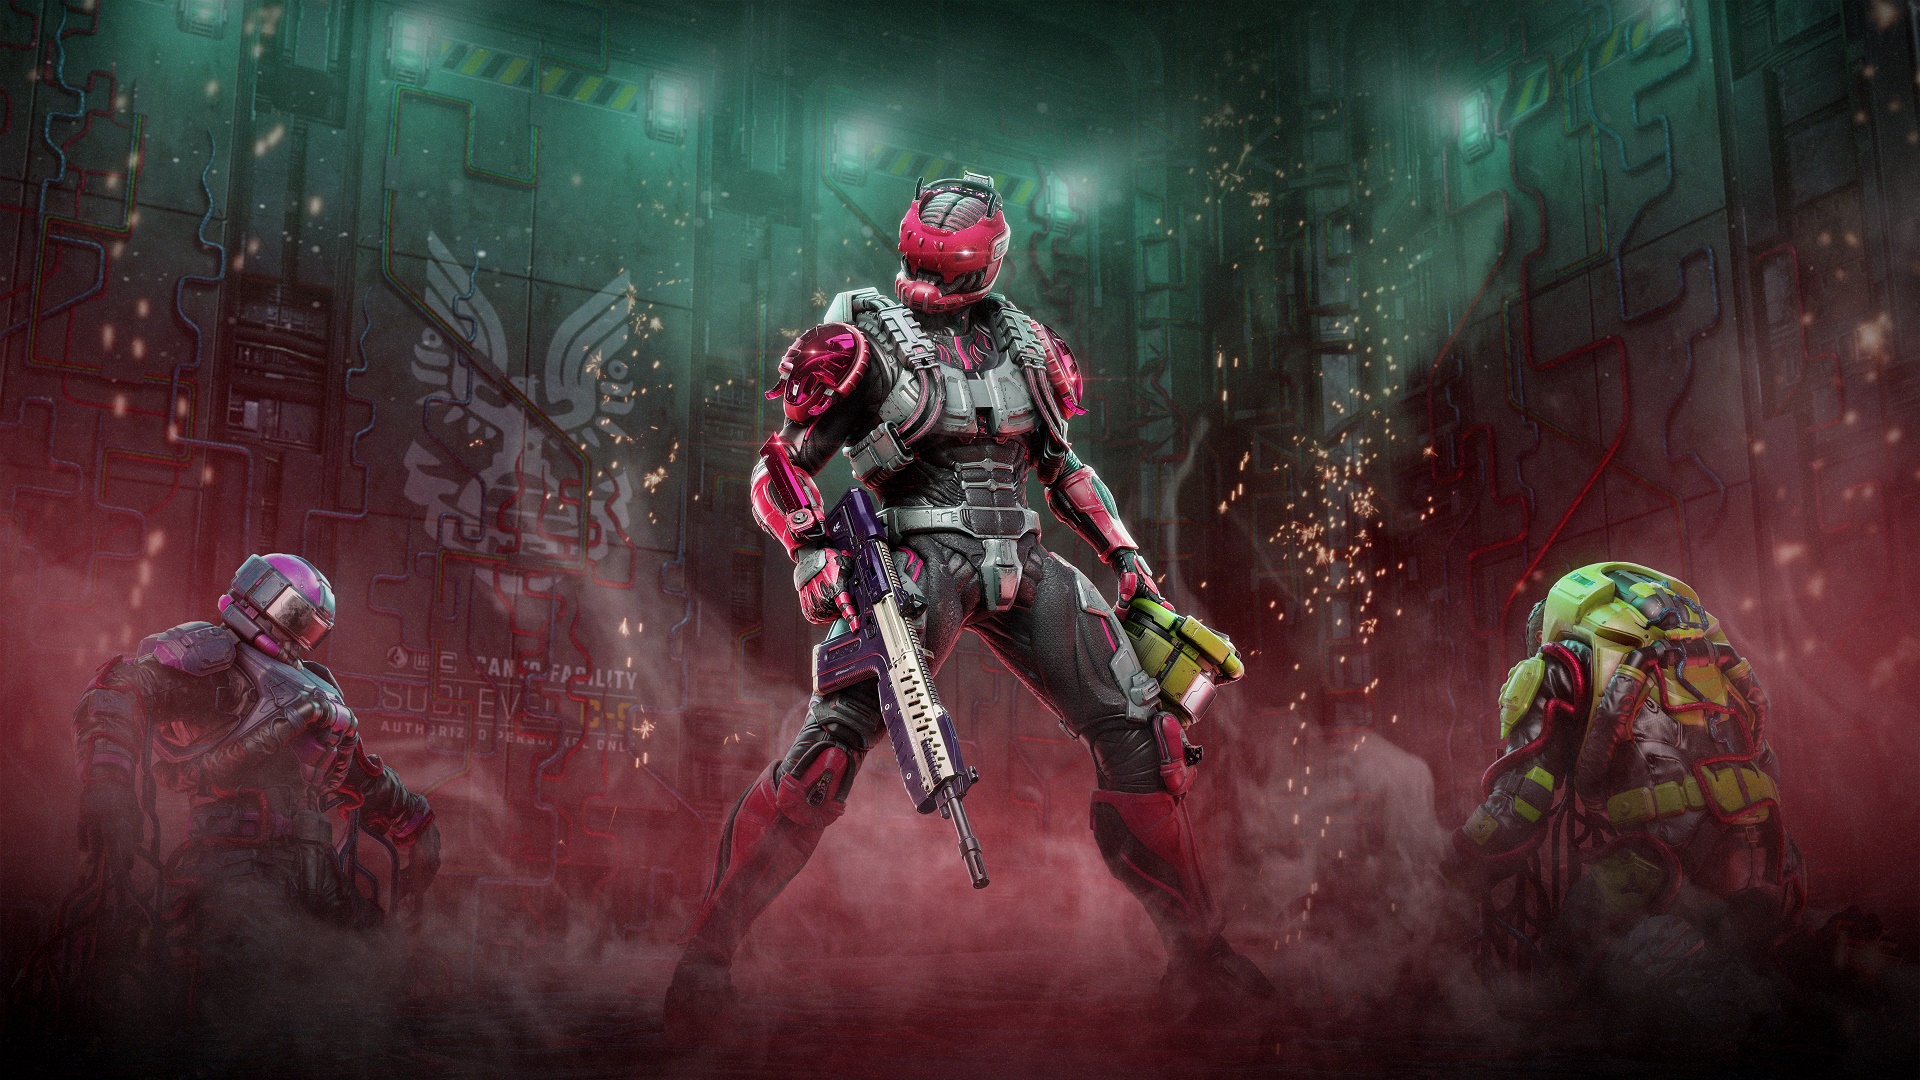 Cyber Showdown III Operation Kicks Off on Halo – Official Site with Intense Battles